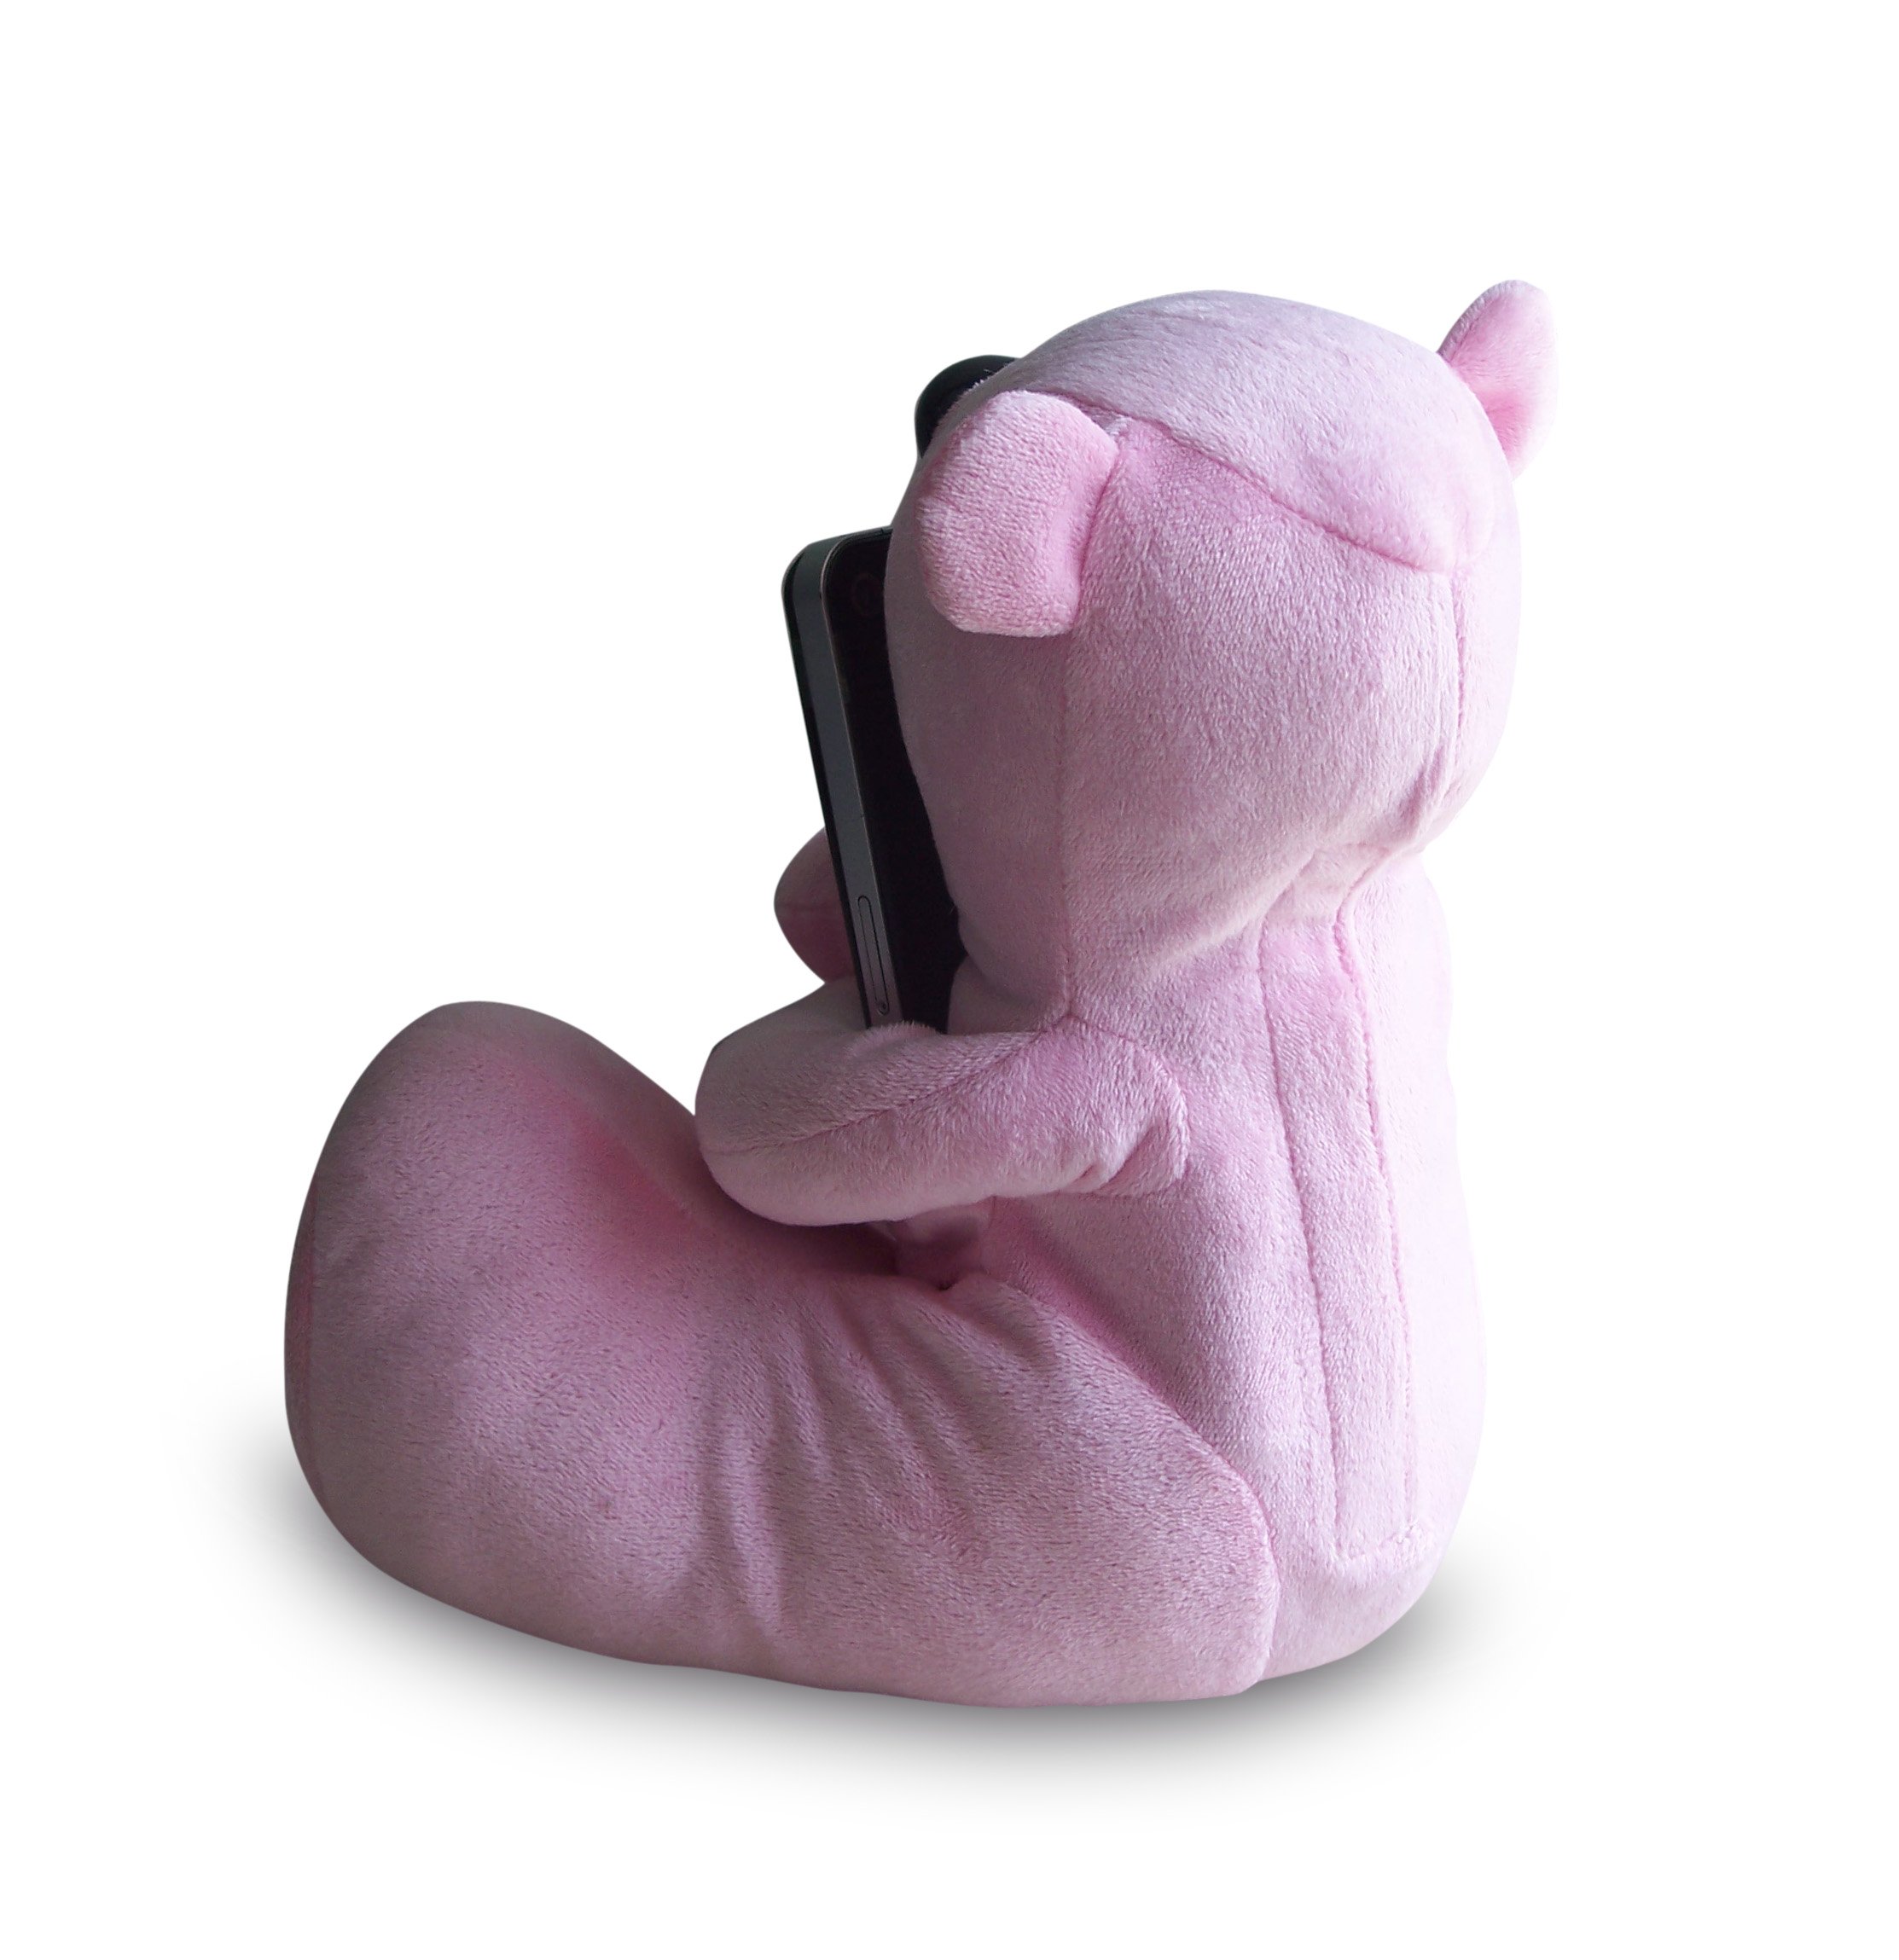 Sungale S-T1 Portable Teddy Speaker For iPod, iPhone, Smartphone, MP3, Media Player (Pink)